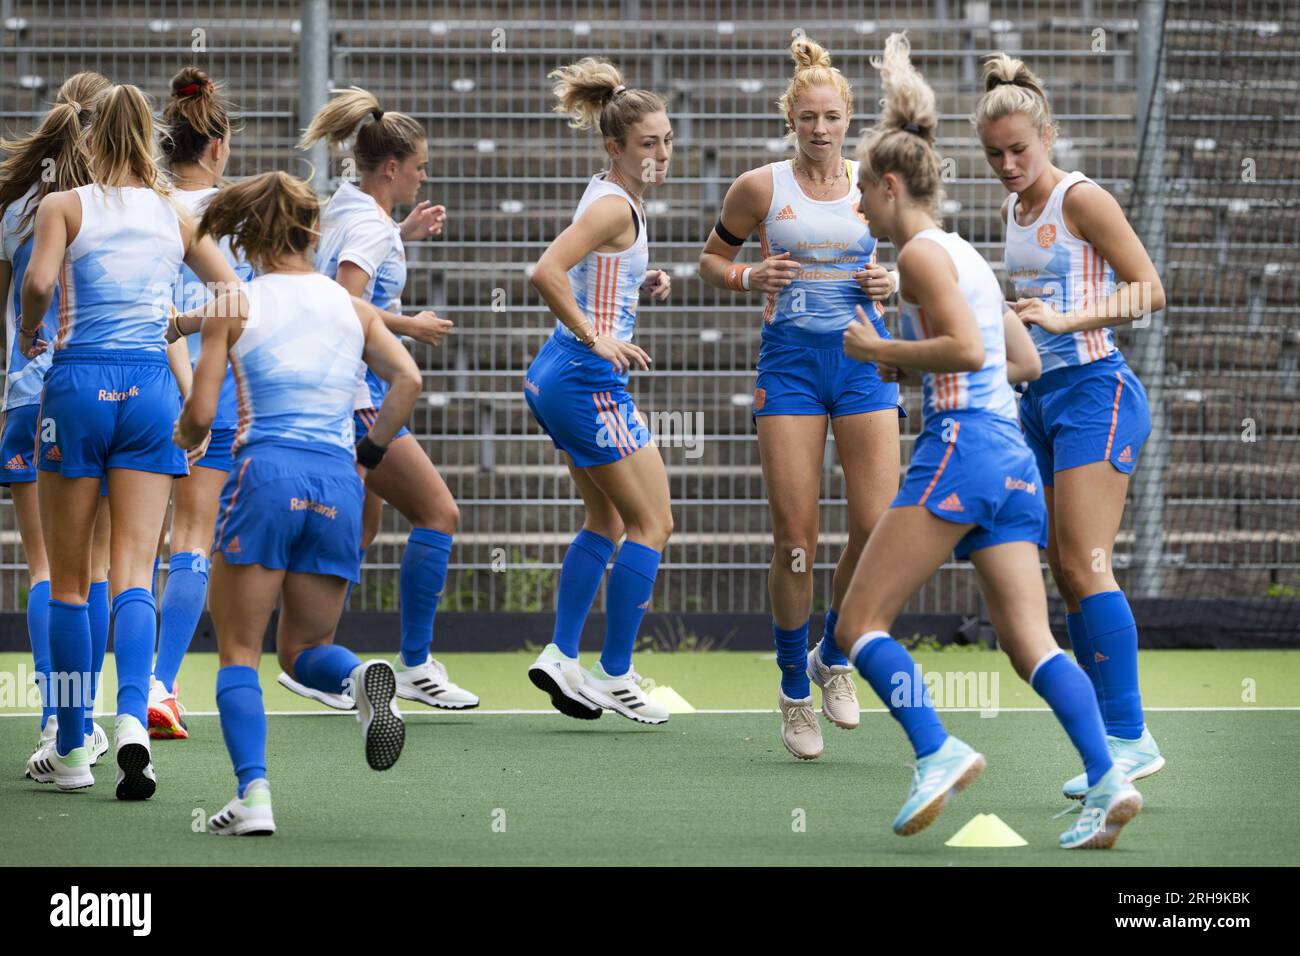 AMSTELVEEN - The Dutch hockey women during the last training session prior  to the European hockey championship in Monchengladbach, Germany. ANP OLAF  KRAAK netherlands out - belgium out Stock Photo - Alamy